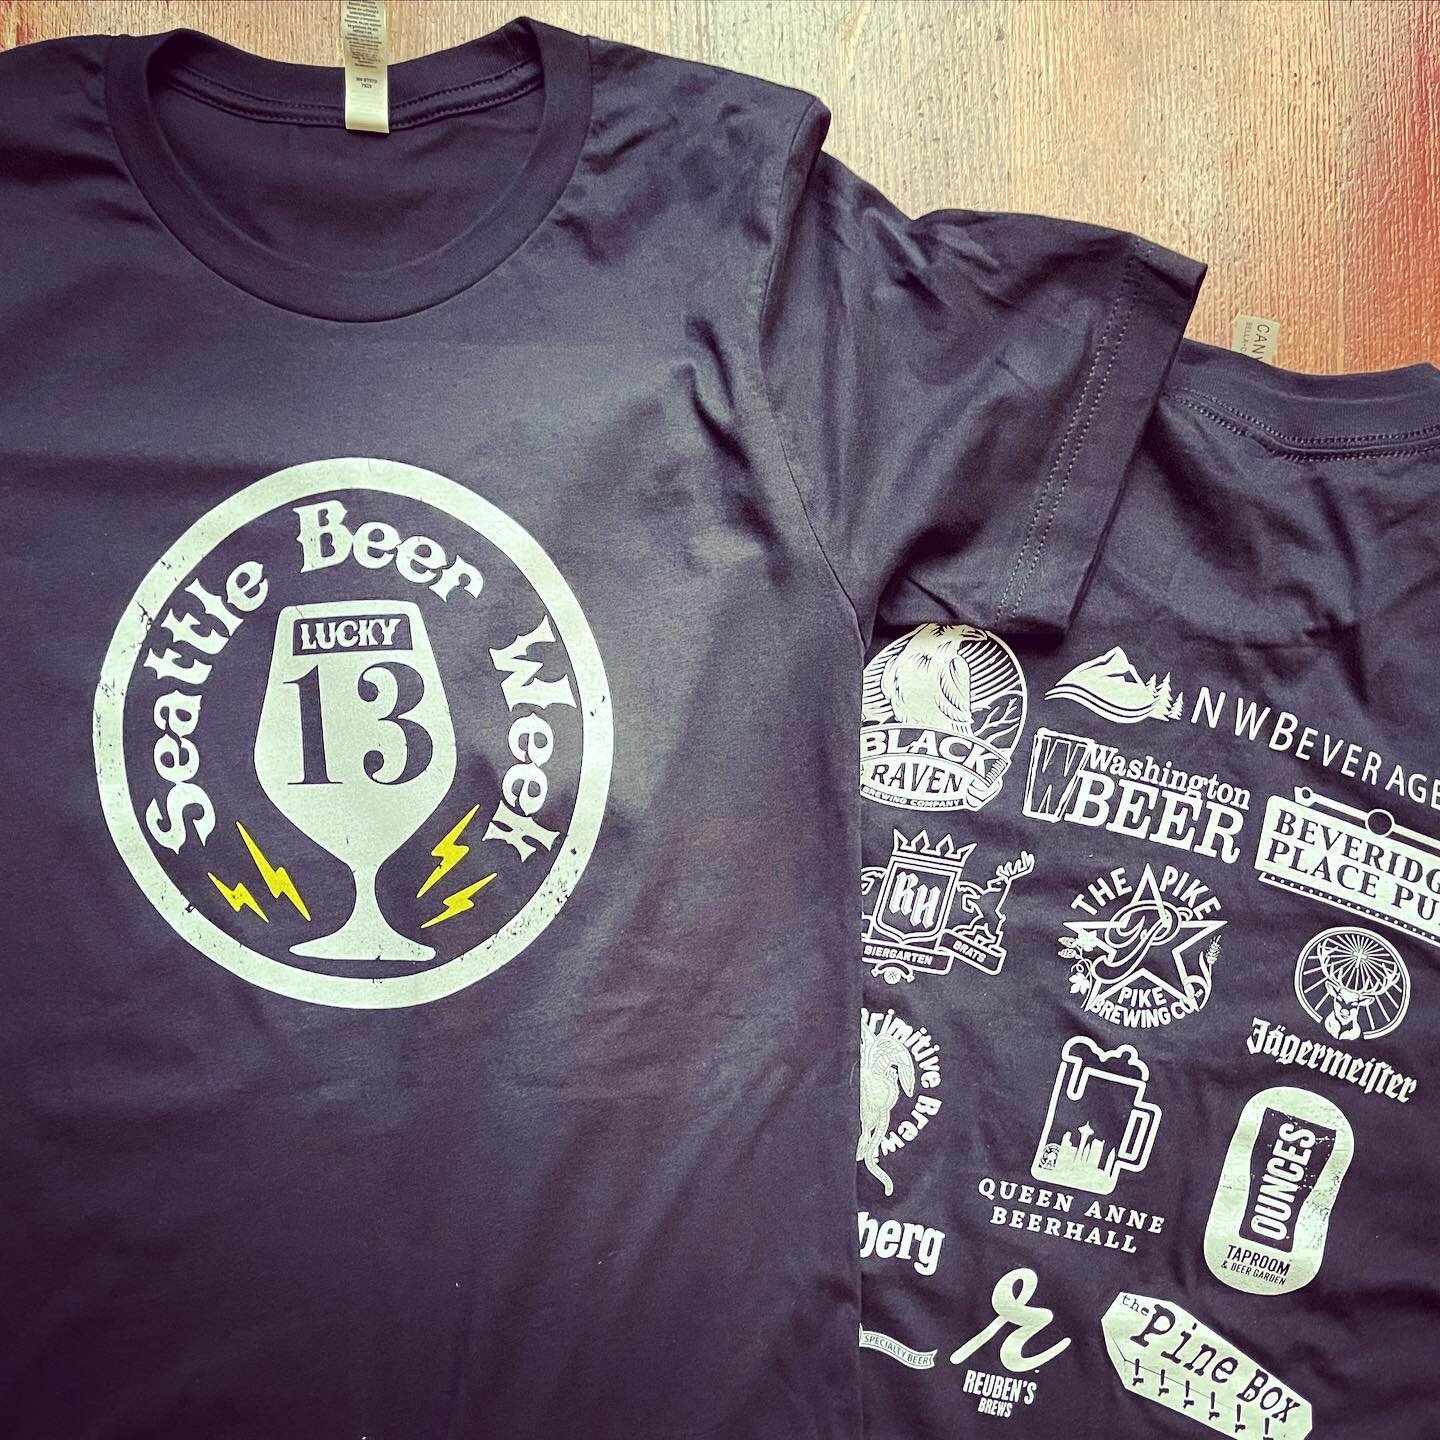 Official SBW13 shirts have landed and are heading out to sponsors this week. Grab your own this Friday at @queenannebeerhall for the kick off event. 
If you can&rsquo;t wait until Friday head to the @pine_box between ow and then for first dibs on shi